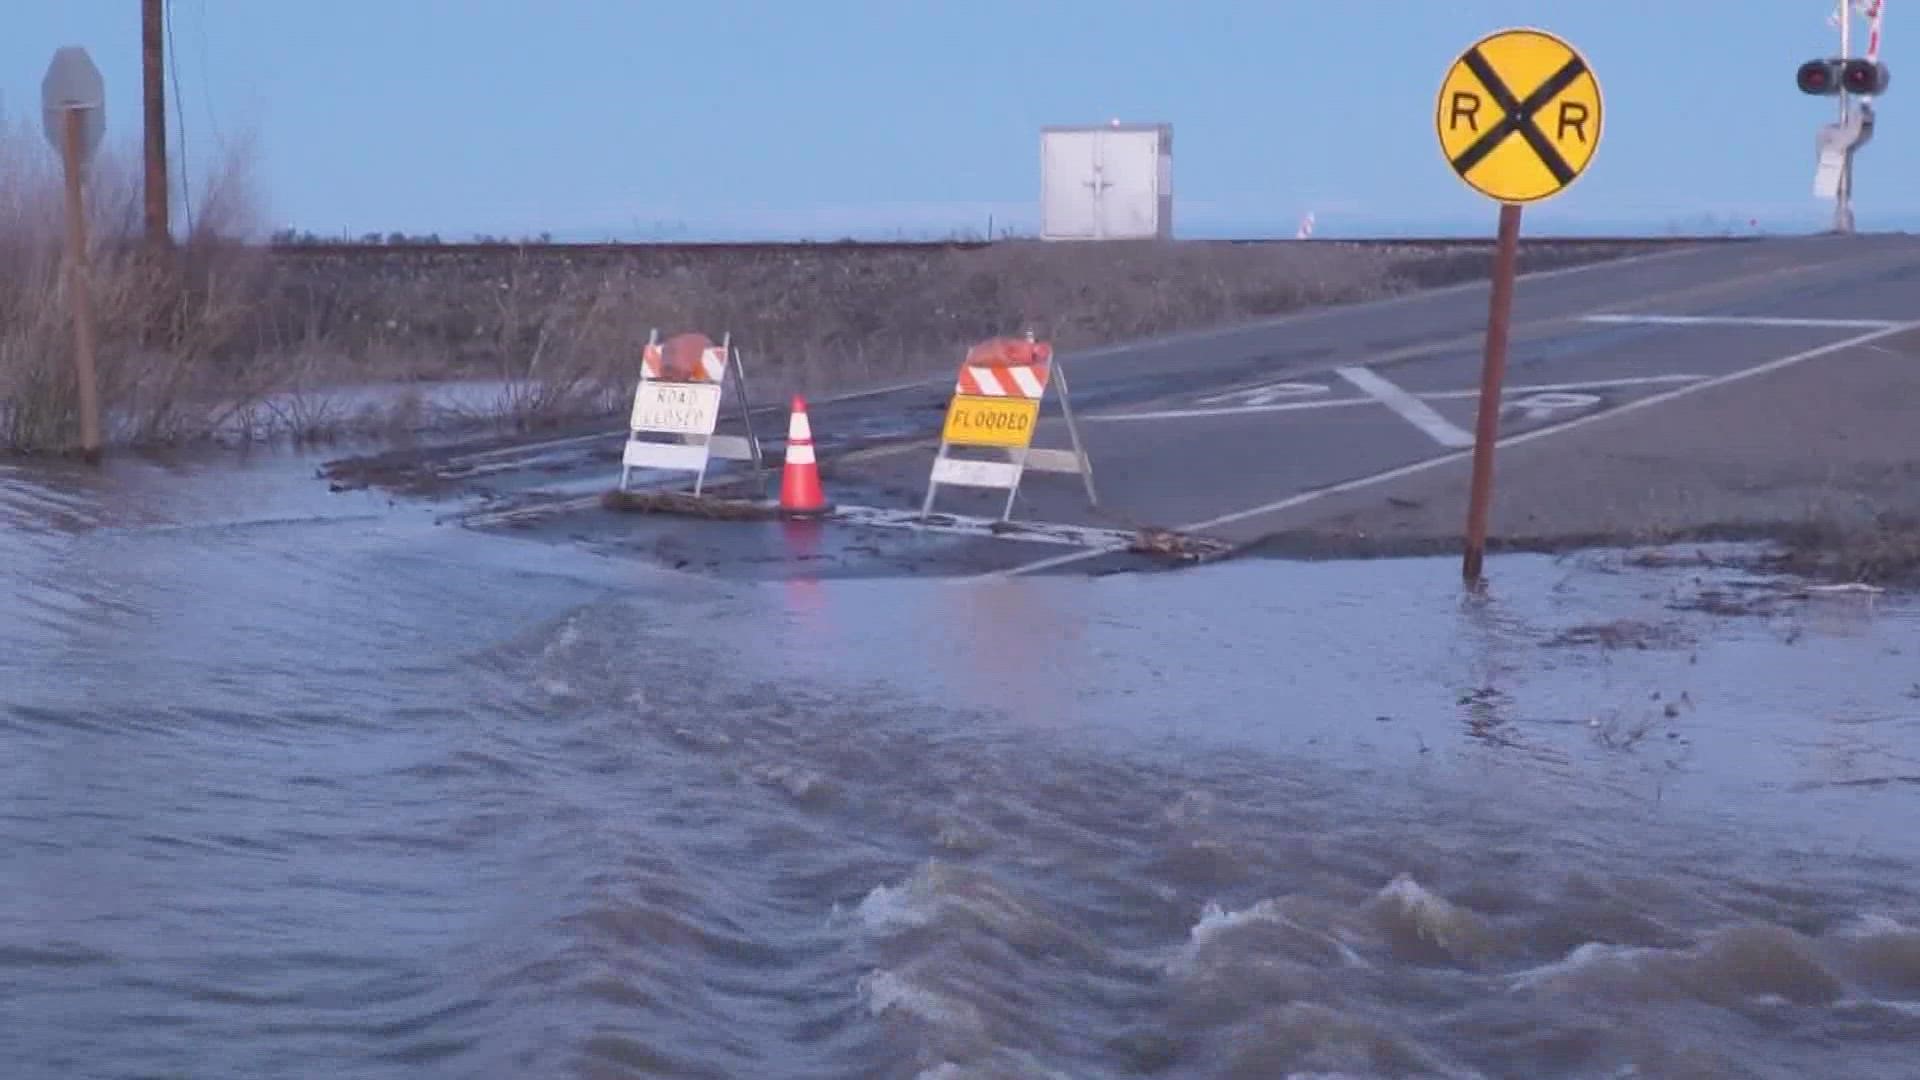 Crews working to repair levees around Cosumnes River, nearby roads still closed